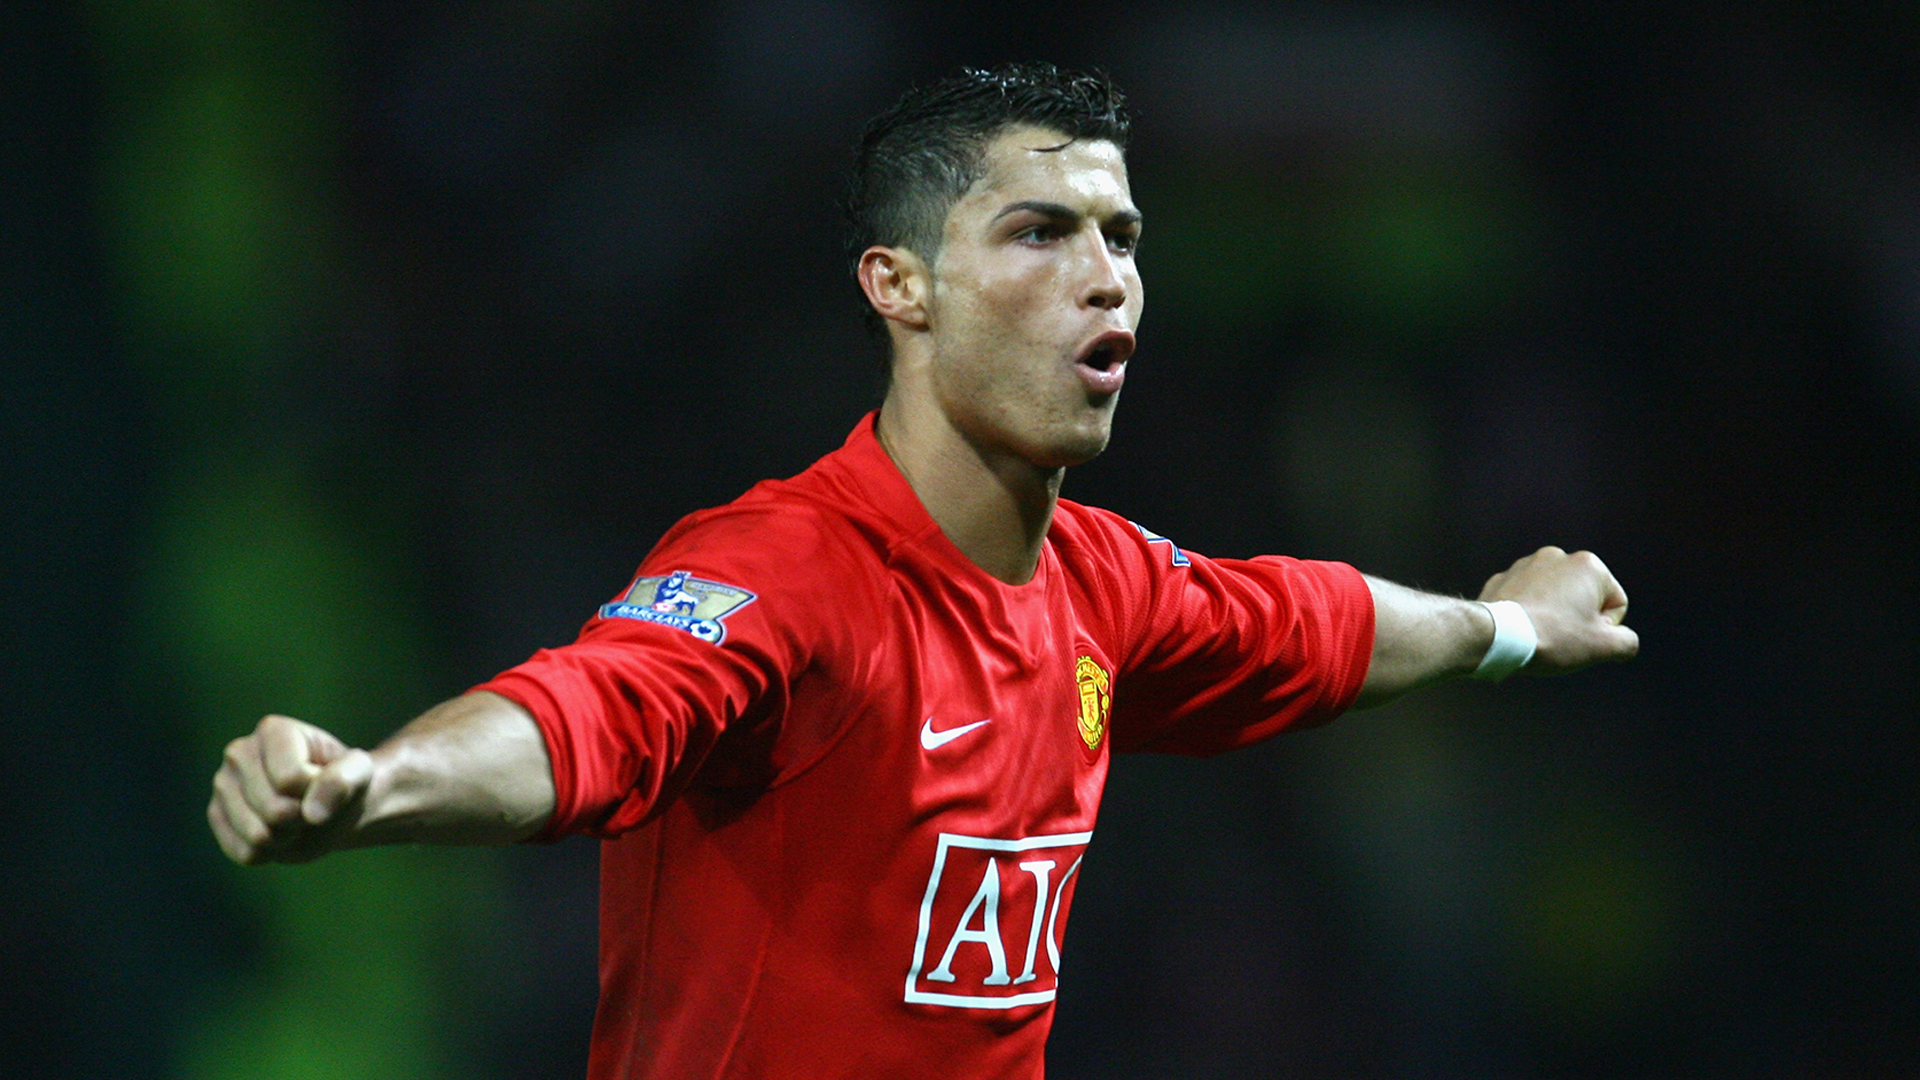 Why Man Utd beat Liverpool to Ronaldo signing – Houllier